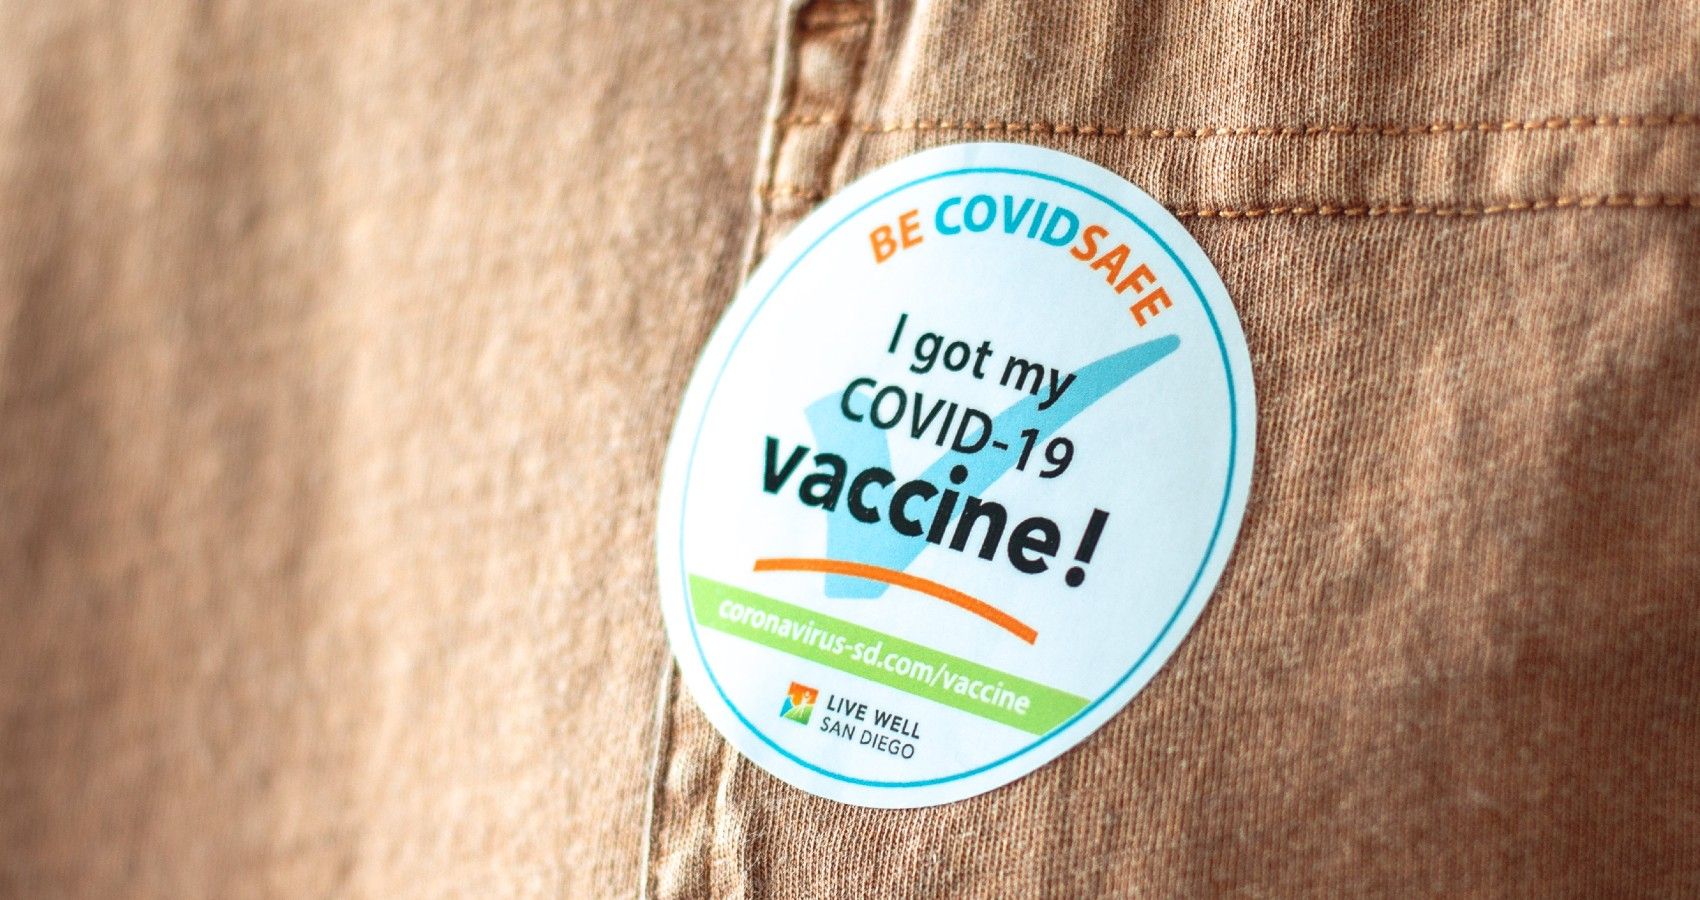 A sticker that says the person got their covid vaccine